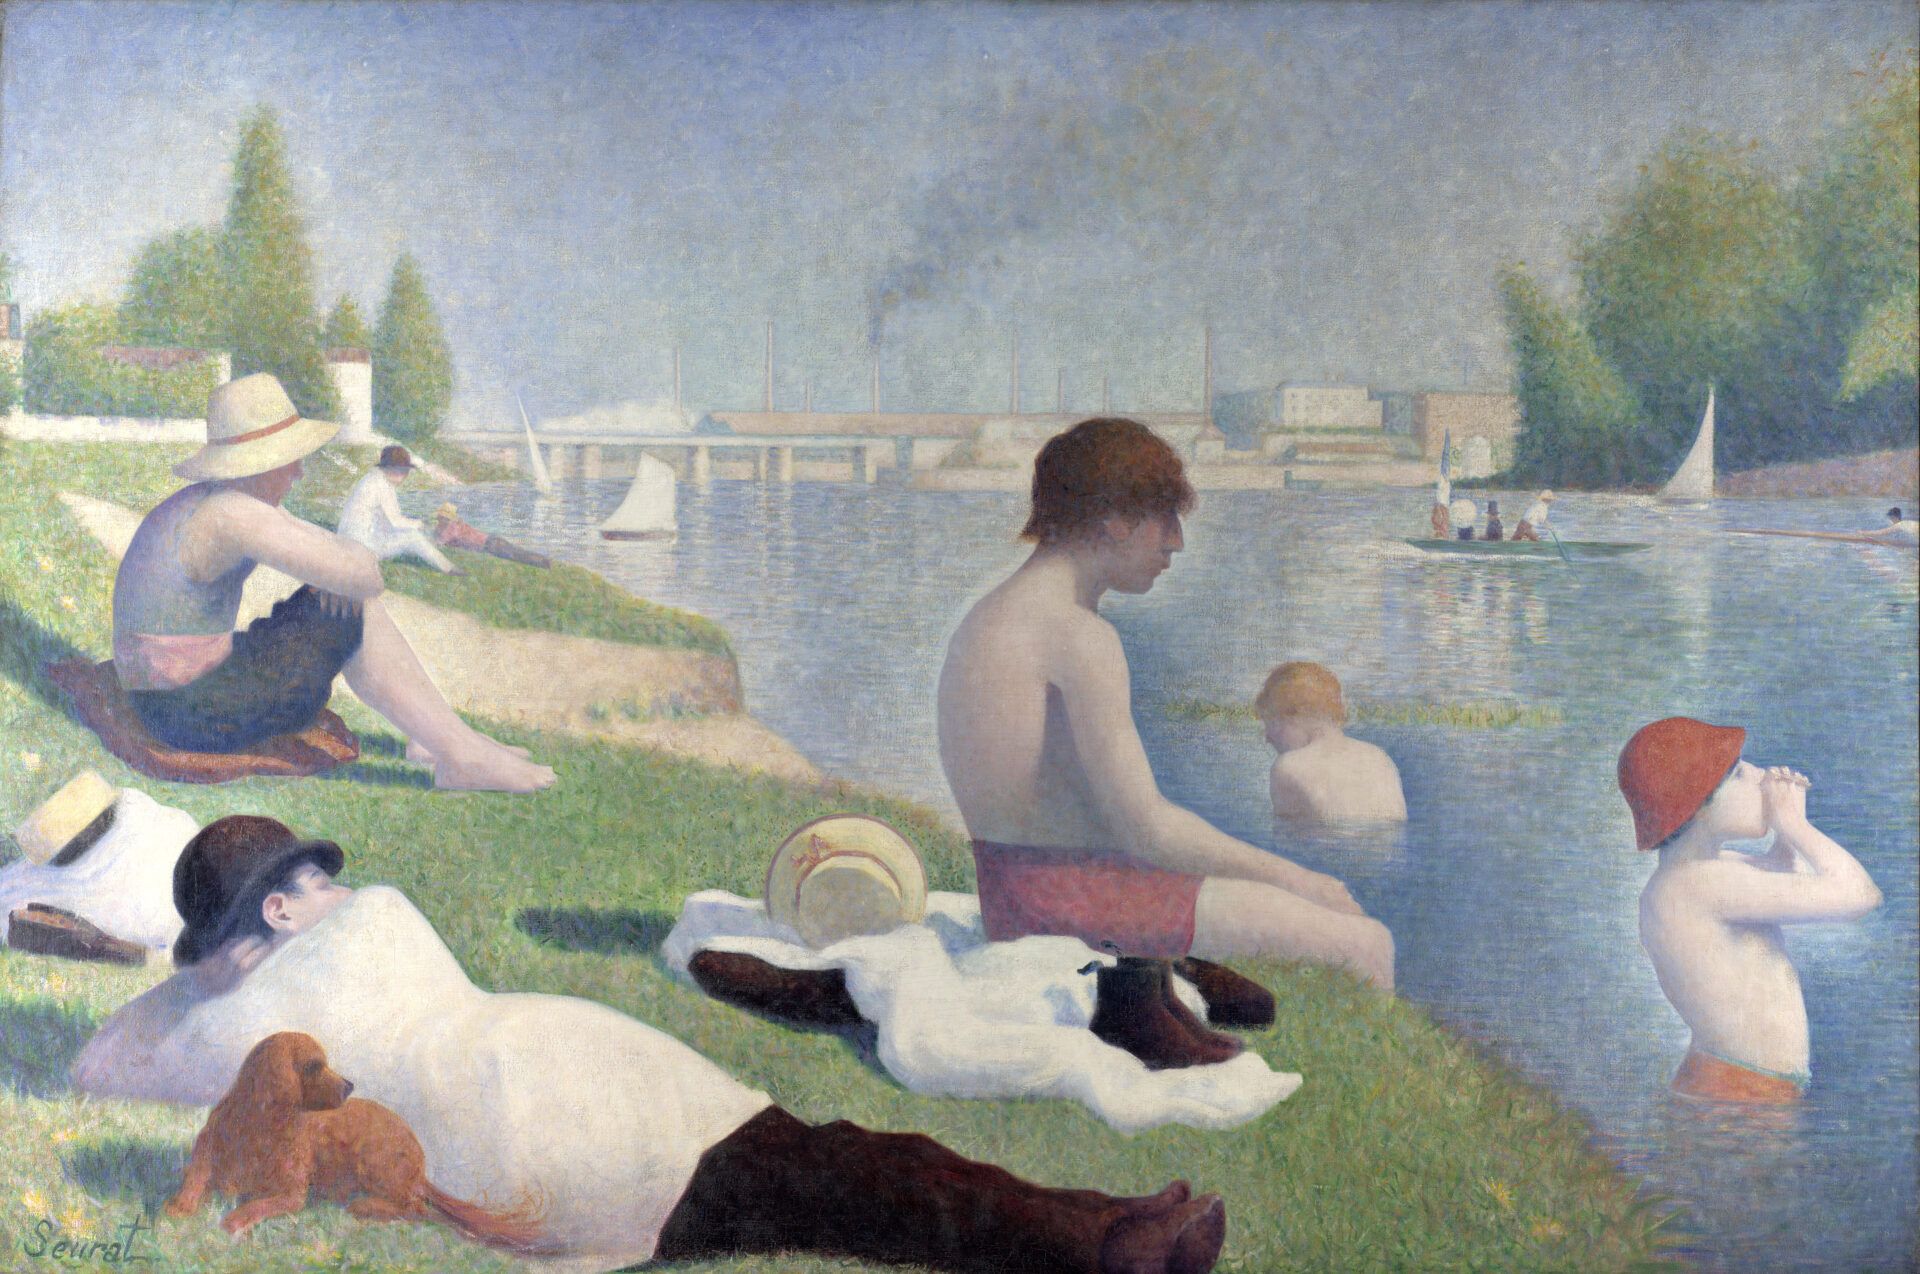 Georges Seurat's Bathers at Asnières shows swimmers in the Seine in 1884. Public domain via Wikimedia Commons.